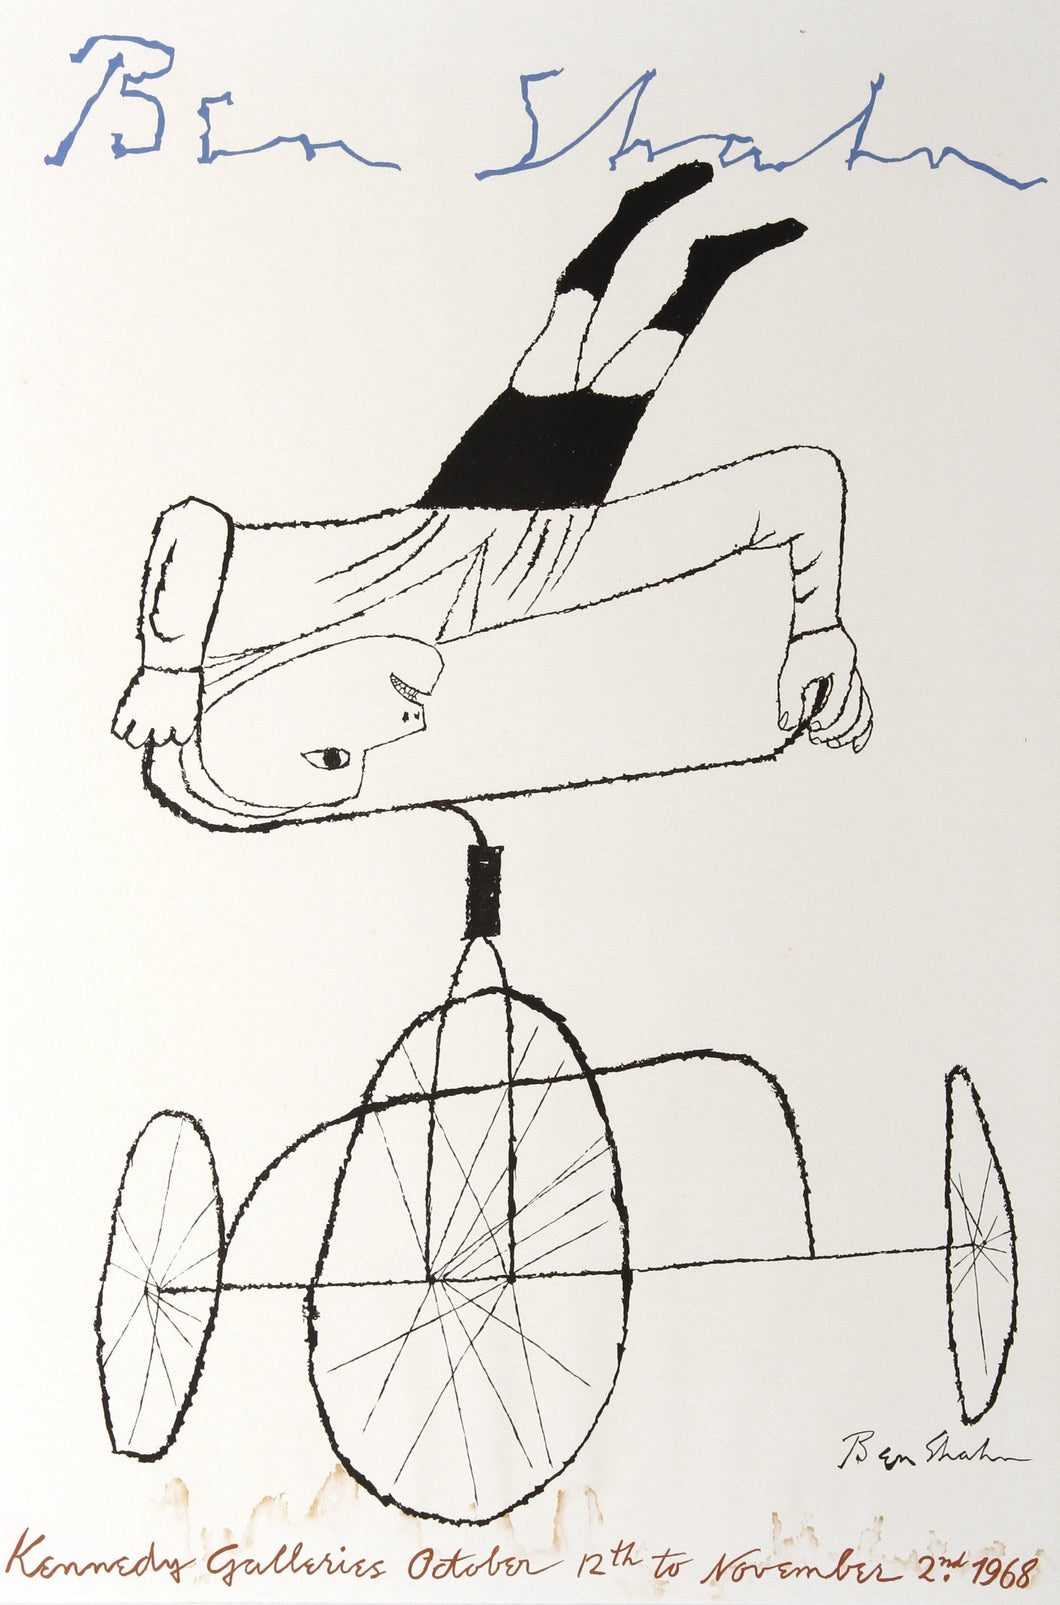 Boy on Bicycle - Kennedy Galleries (Prescott 197) Lithograph | Ben Shahn,{{product.type}}